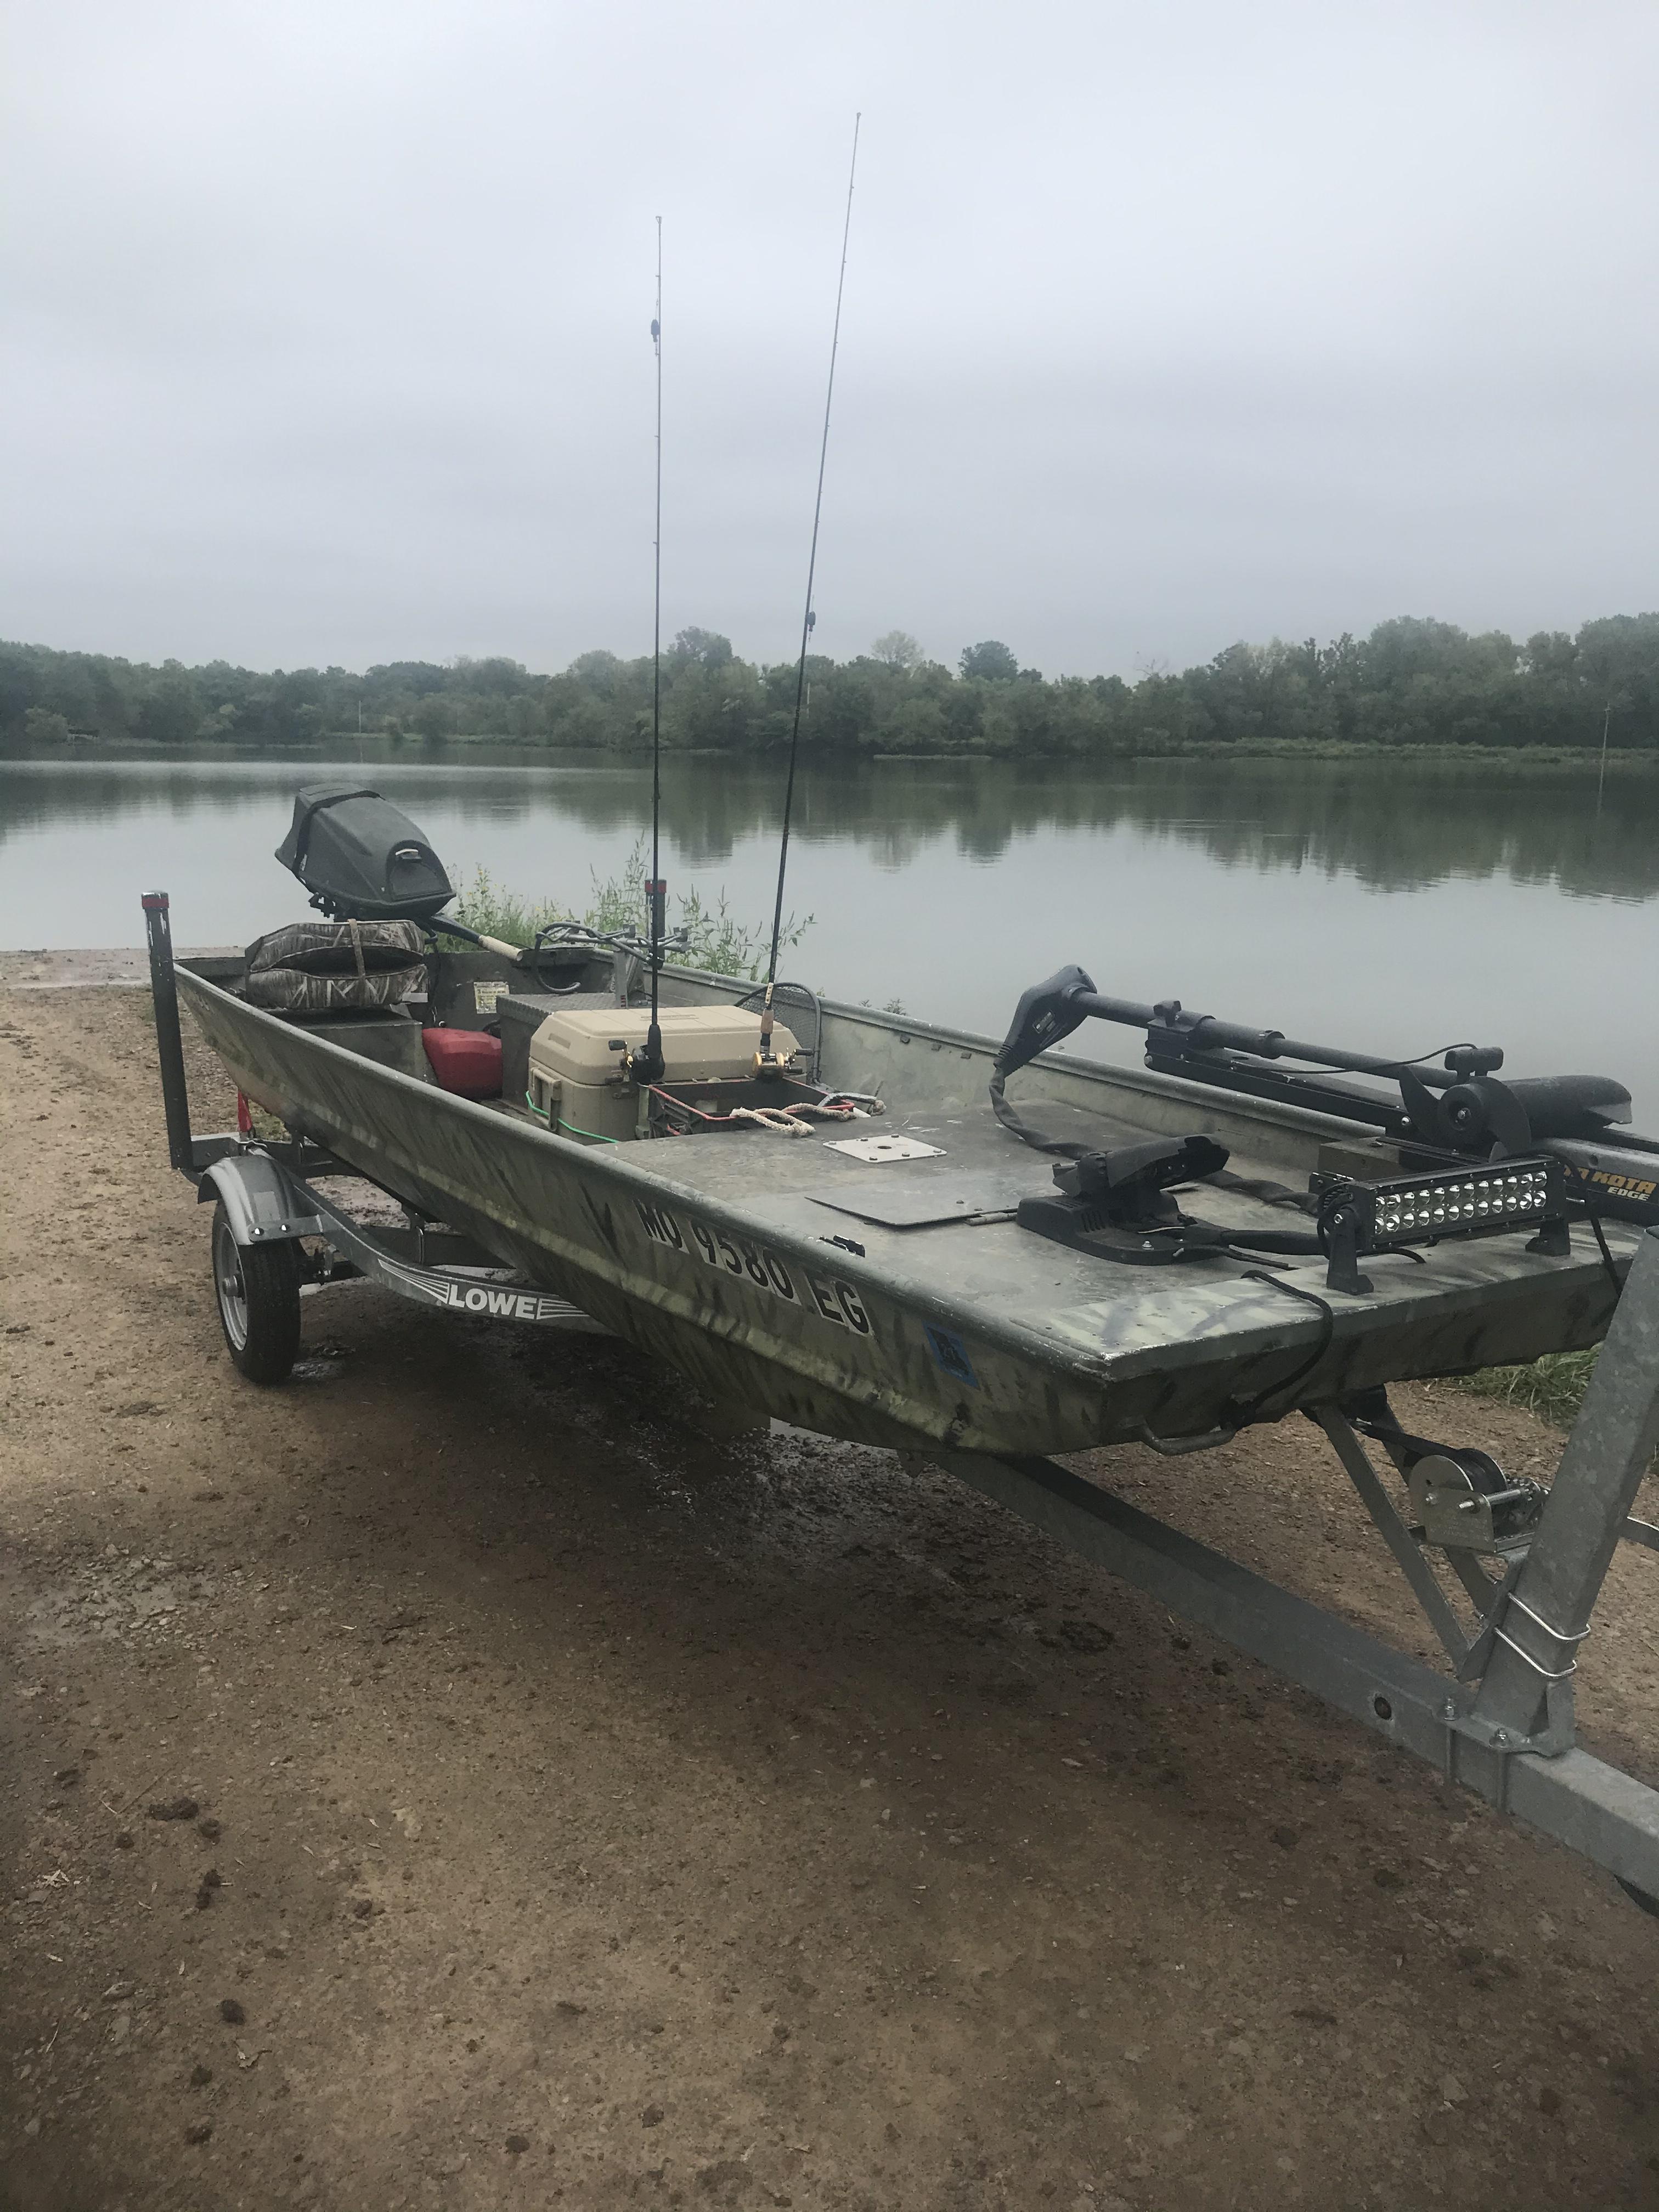 Catfish rod holders - Tips & Tricks, Boat Help and Product Review -  OzarkAnglers.Com Forum